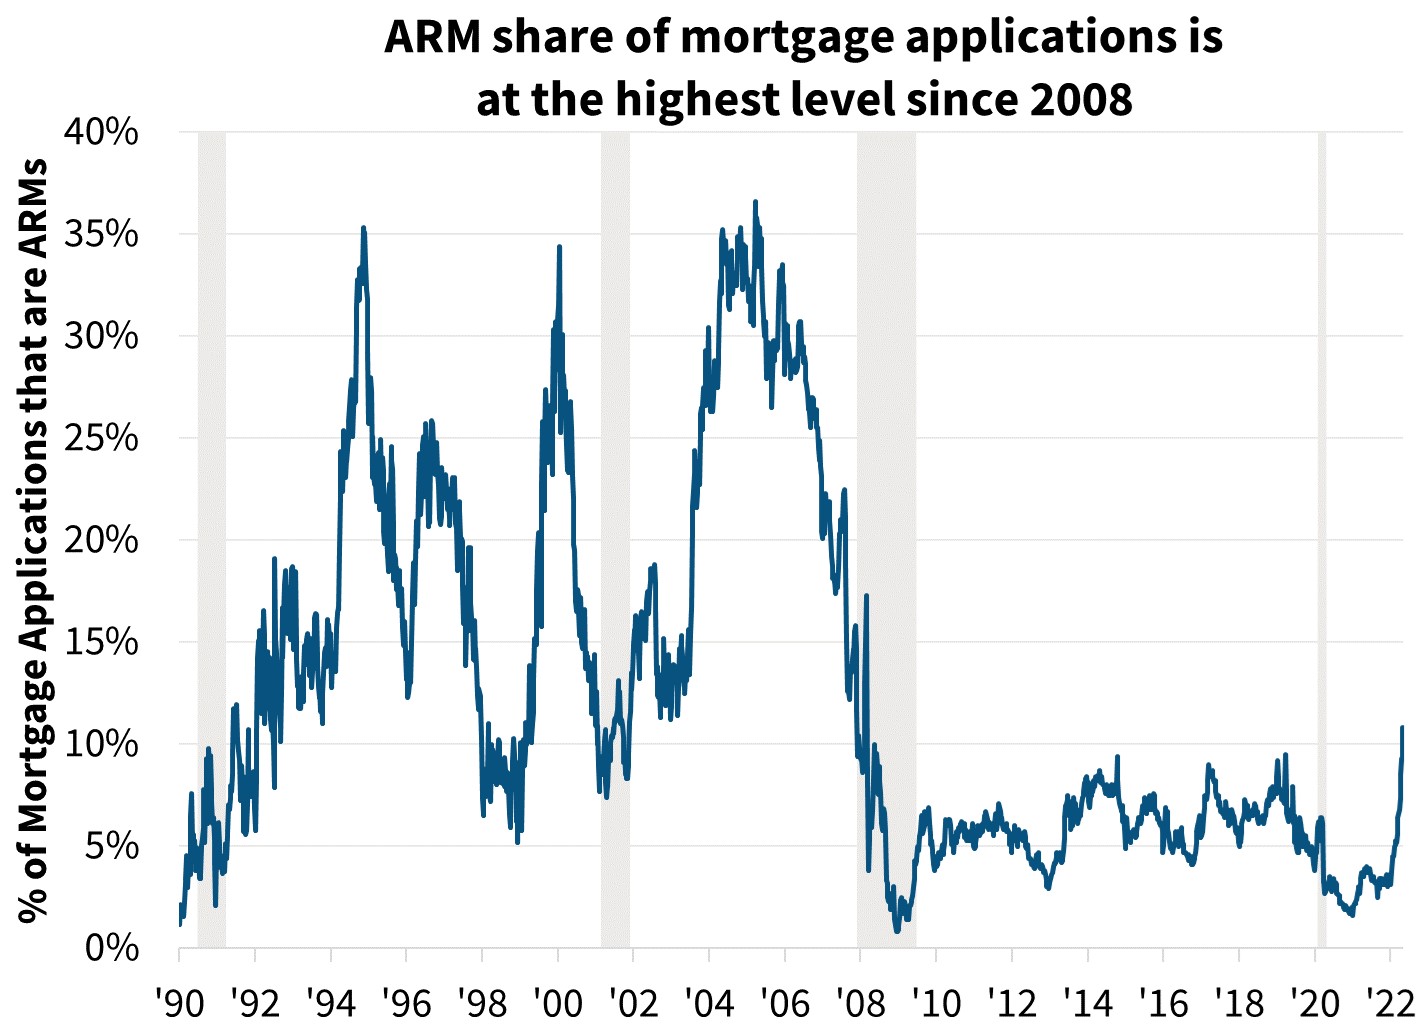  ARM share of mortgage applications is at the highest level since 2008 